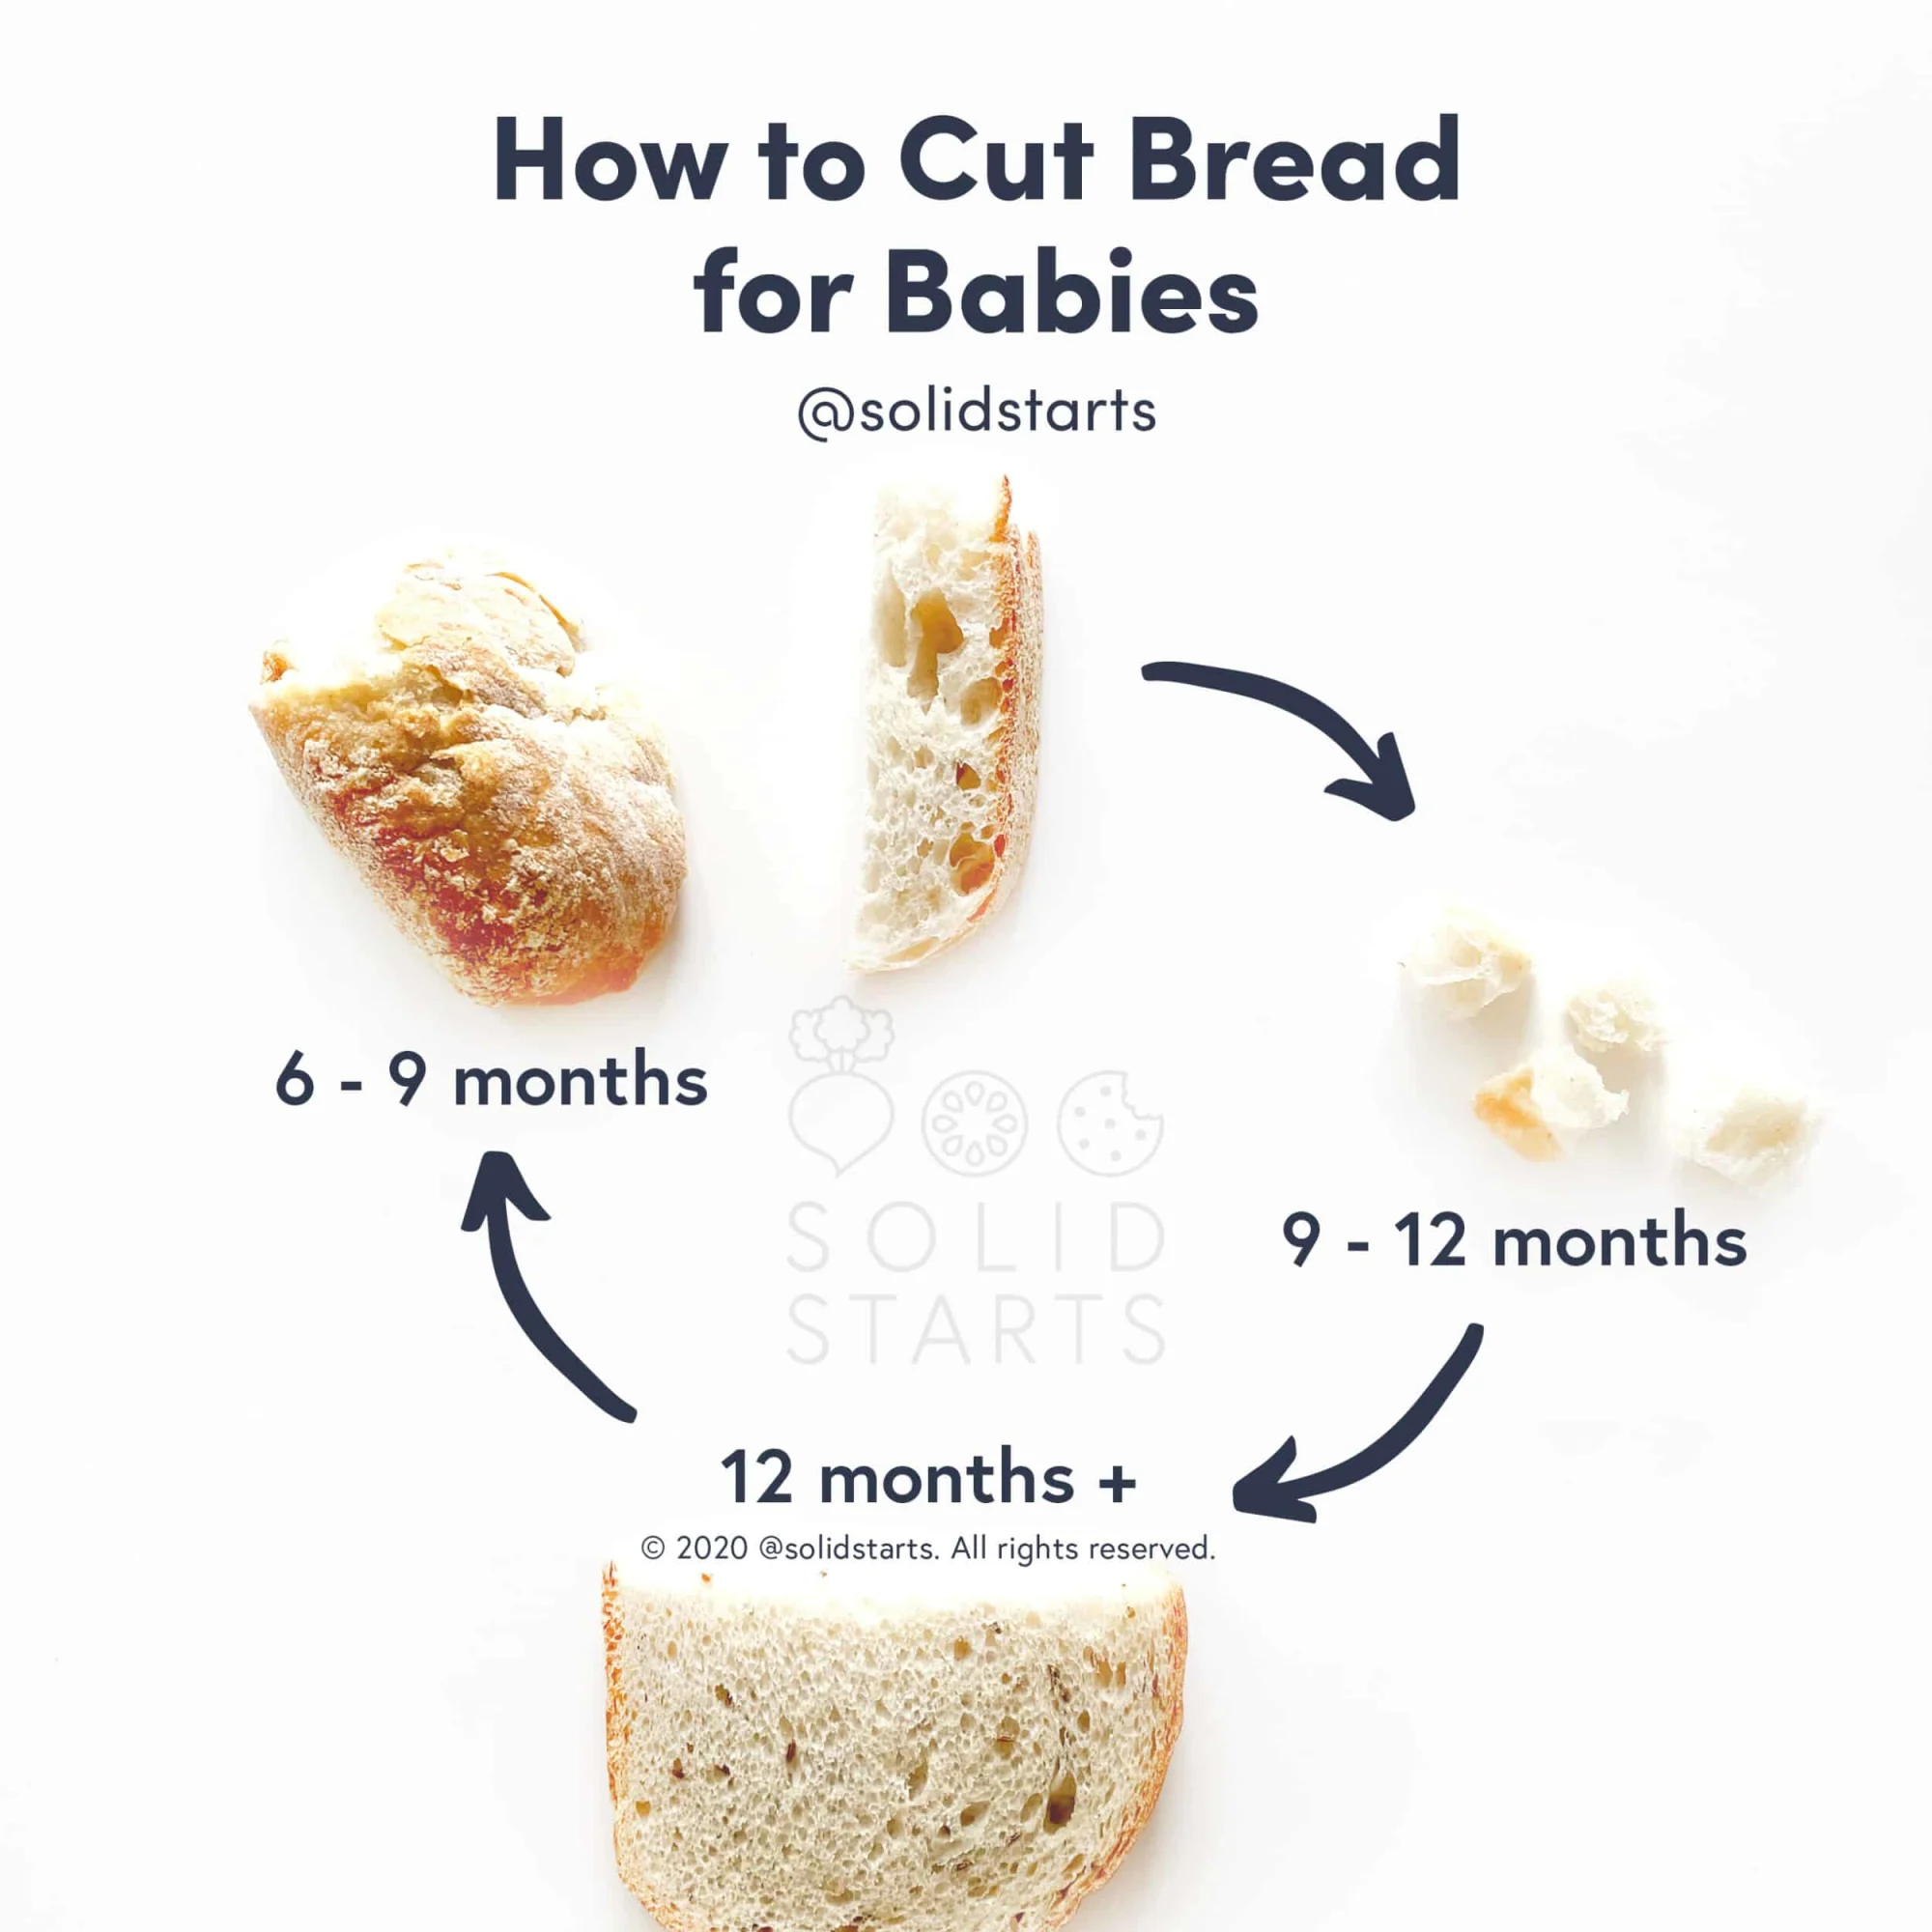 An infographic showing the sizes of bread by baby age: large ends or strips of bread at 6-9 months, bite size pieces from 9-12 months, and a half a piece of bread at 12 mos+